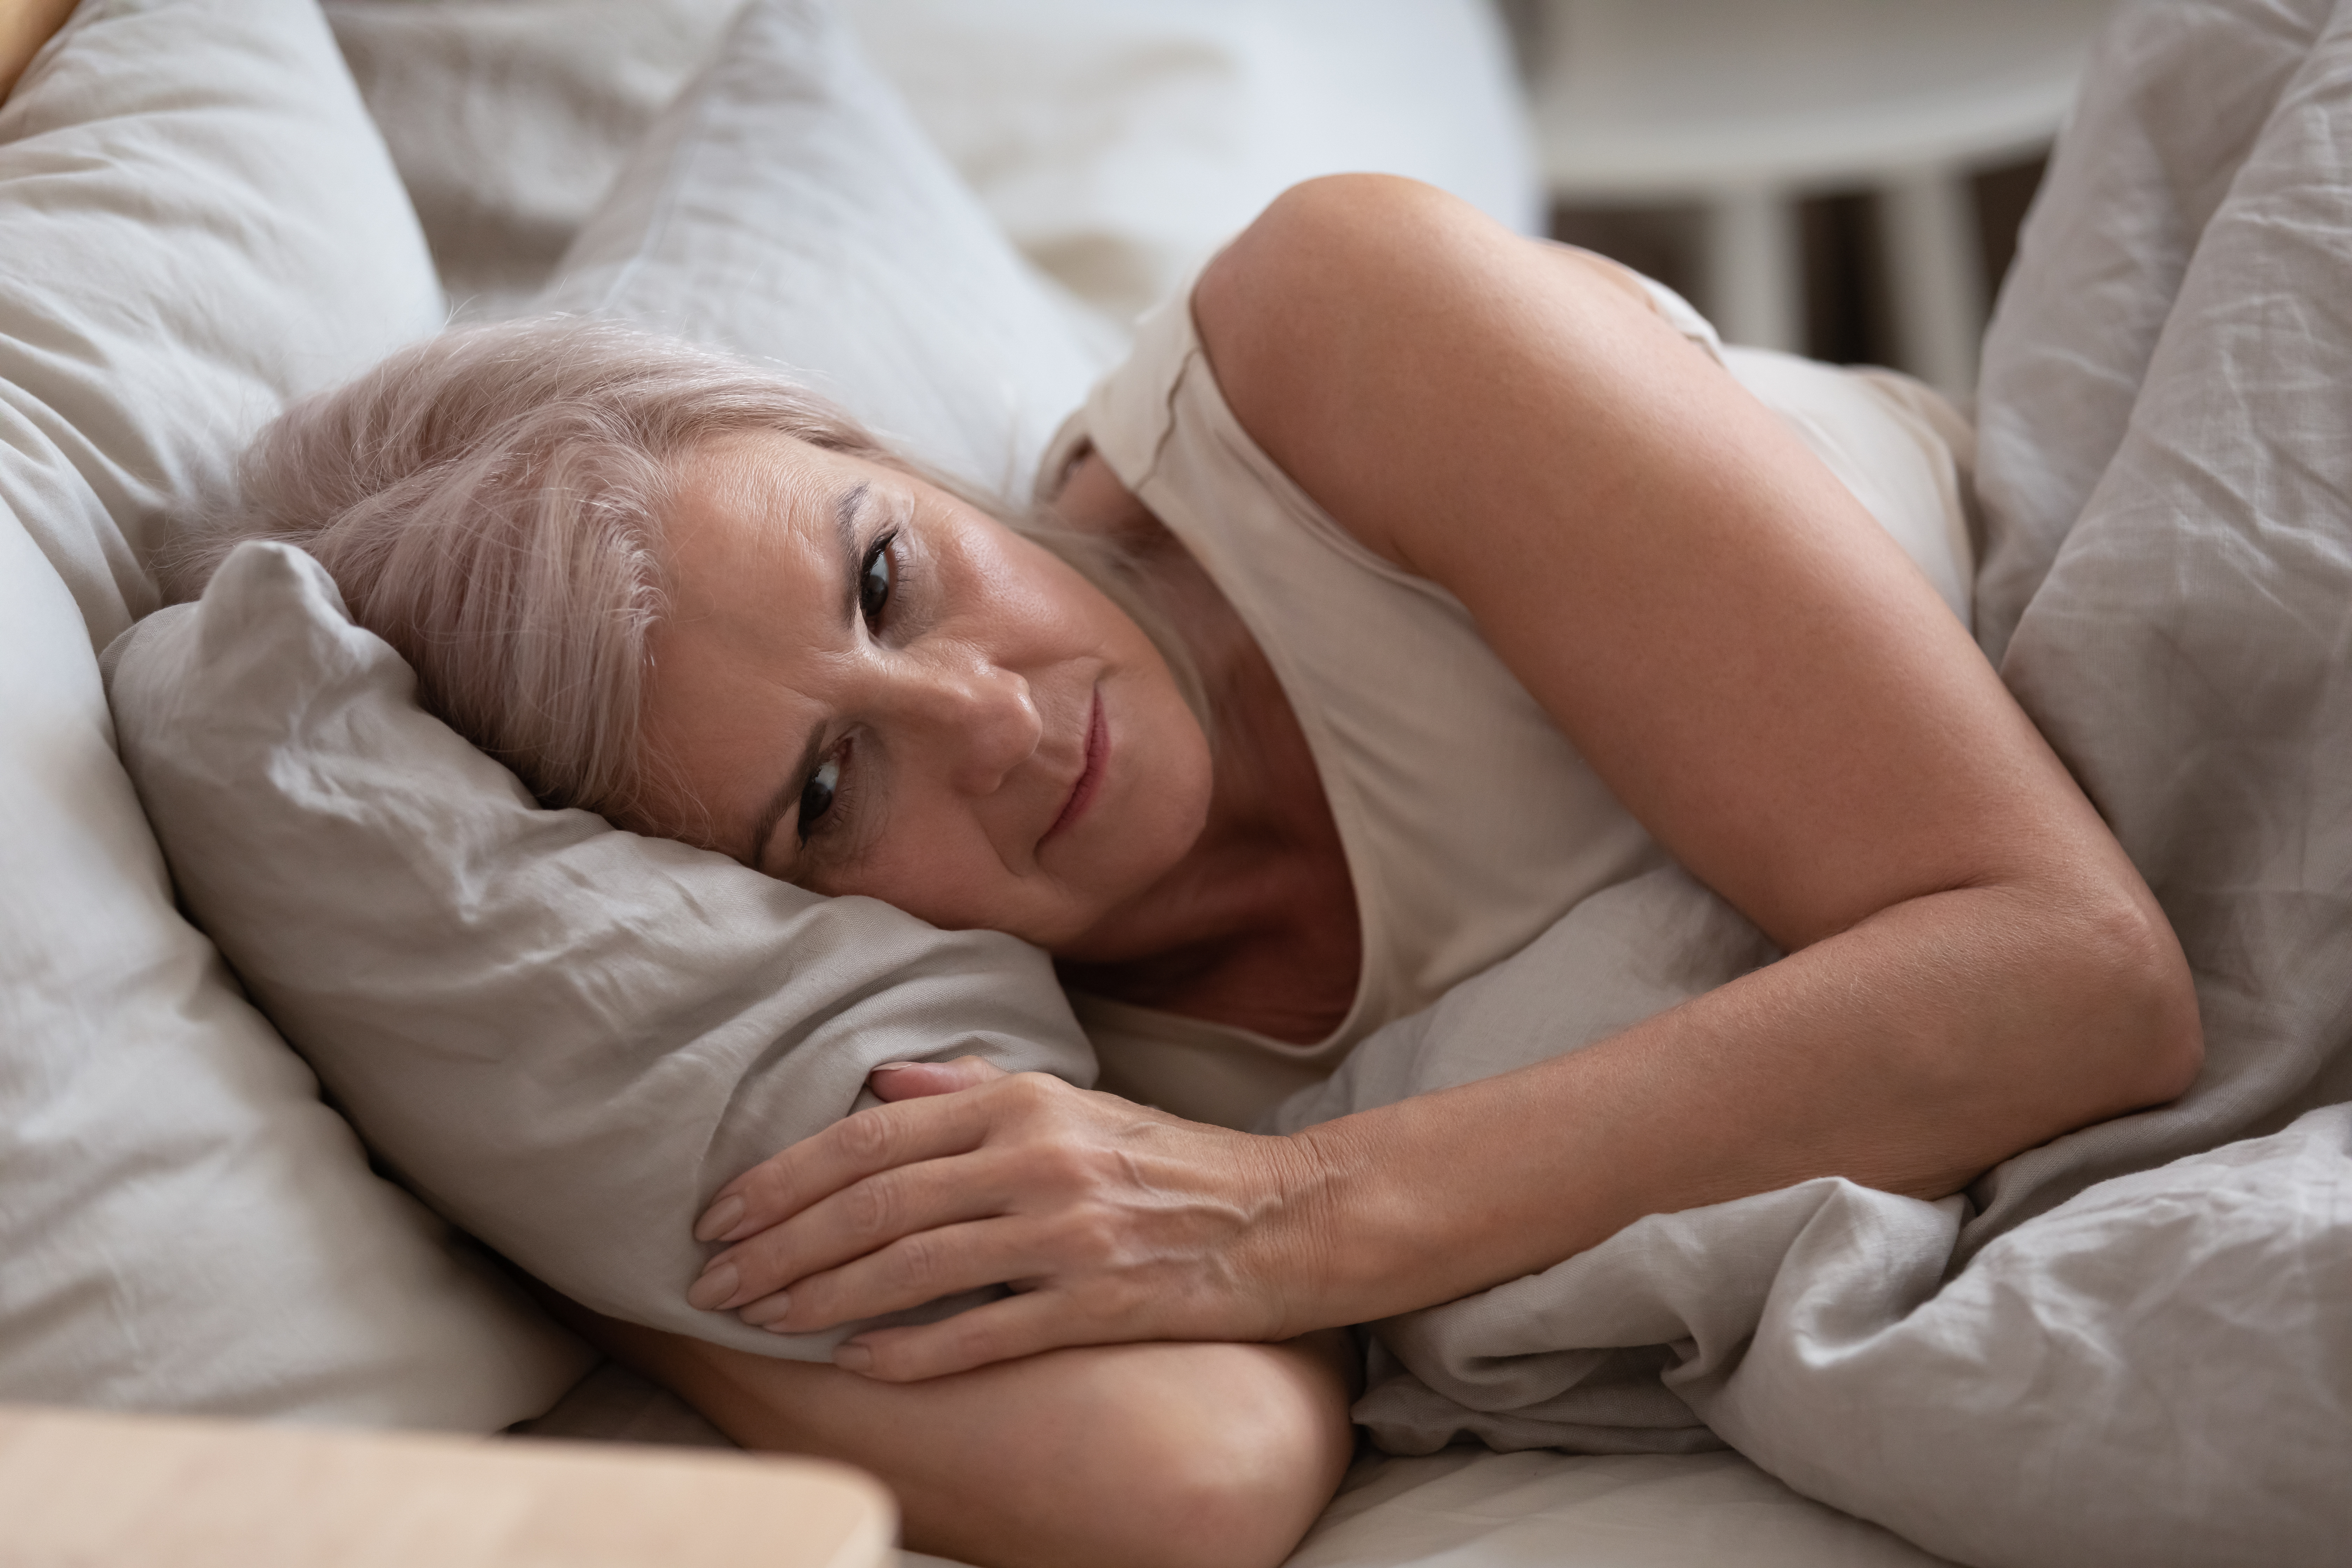 A woman in deep thought while laying in bed | Source: Shutterstock